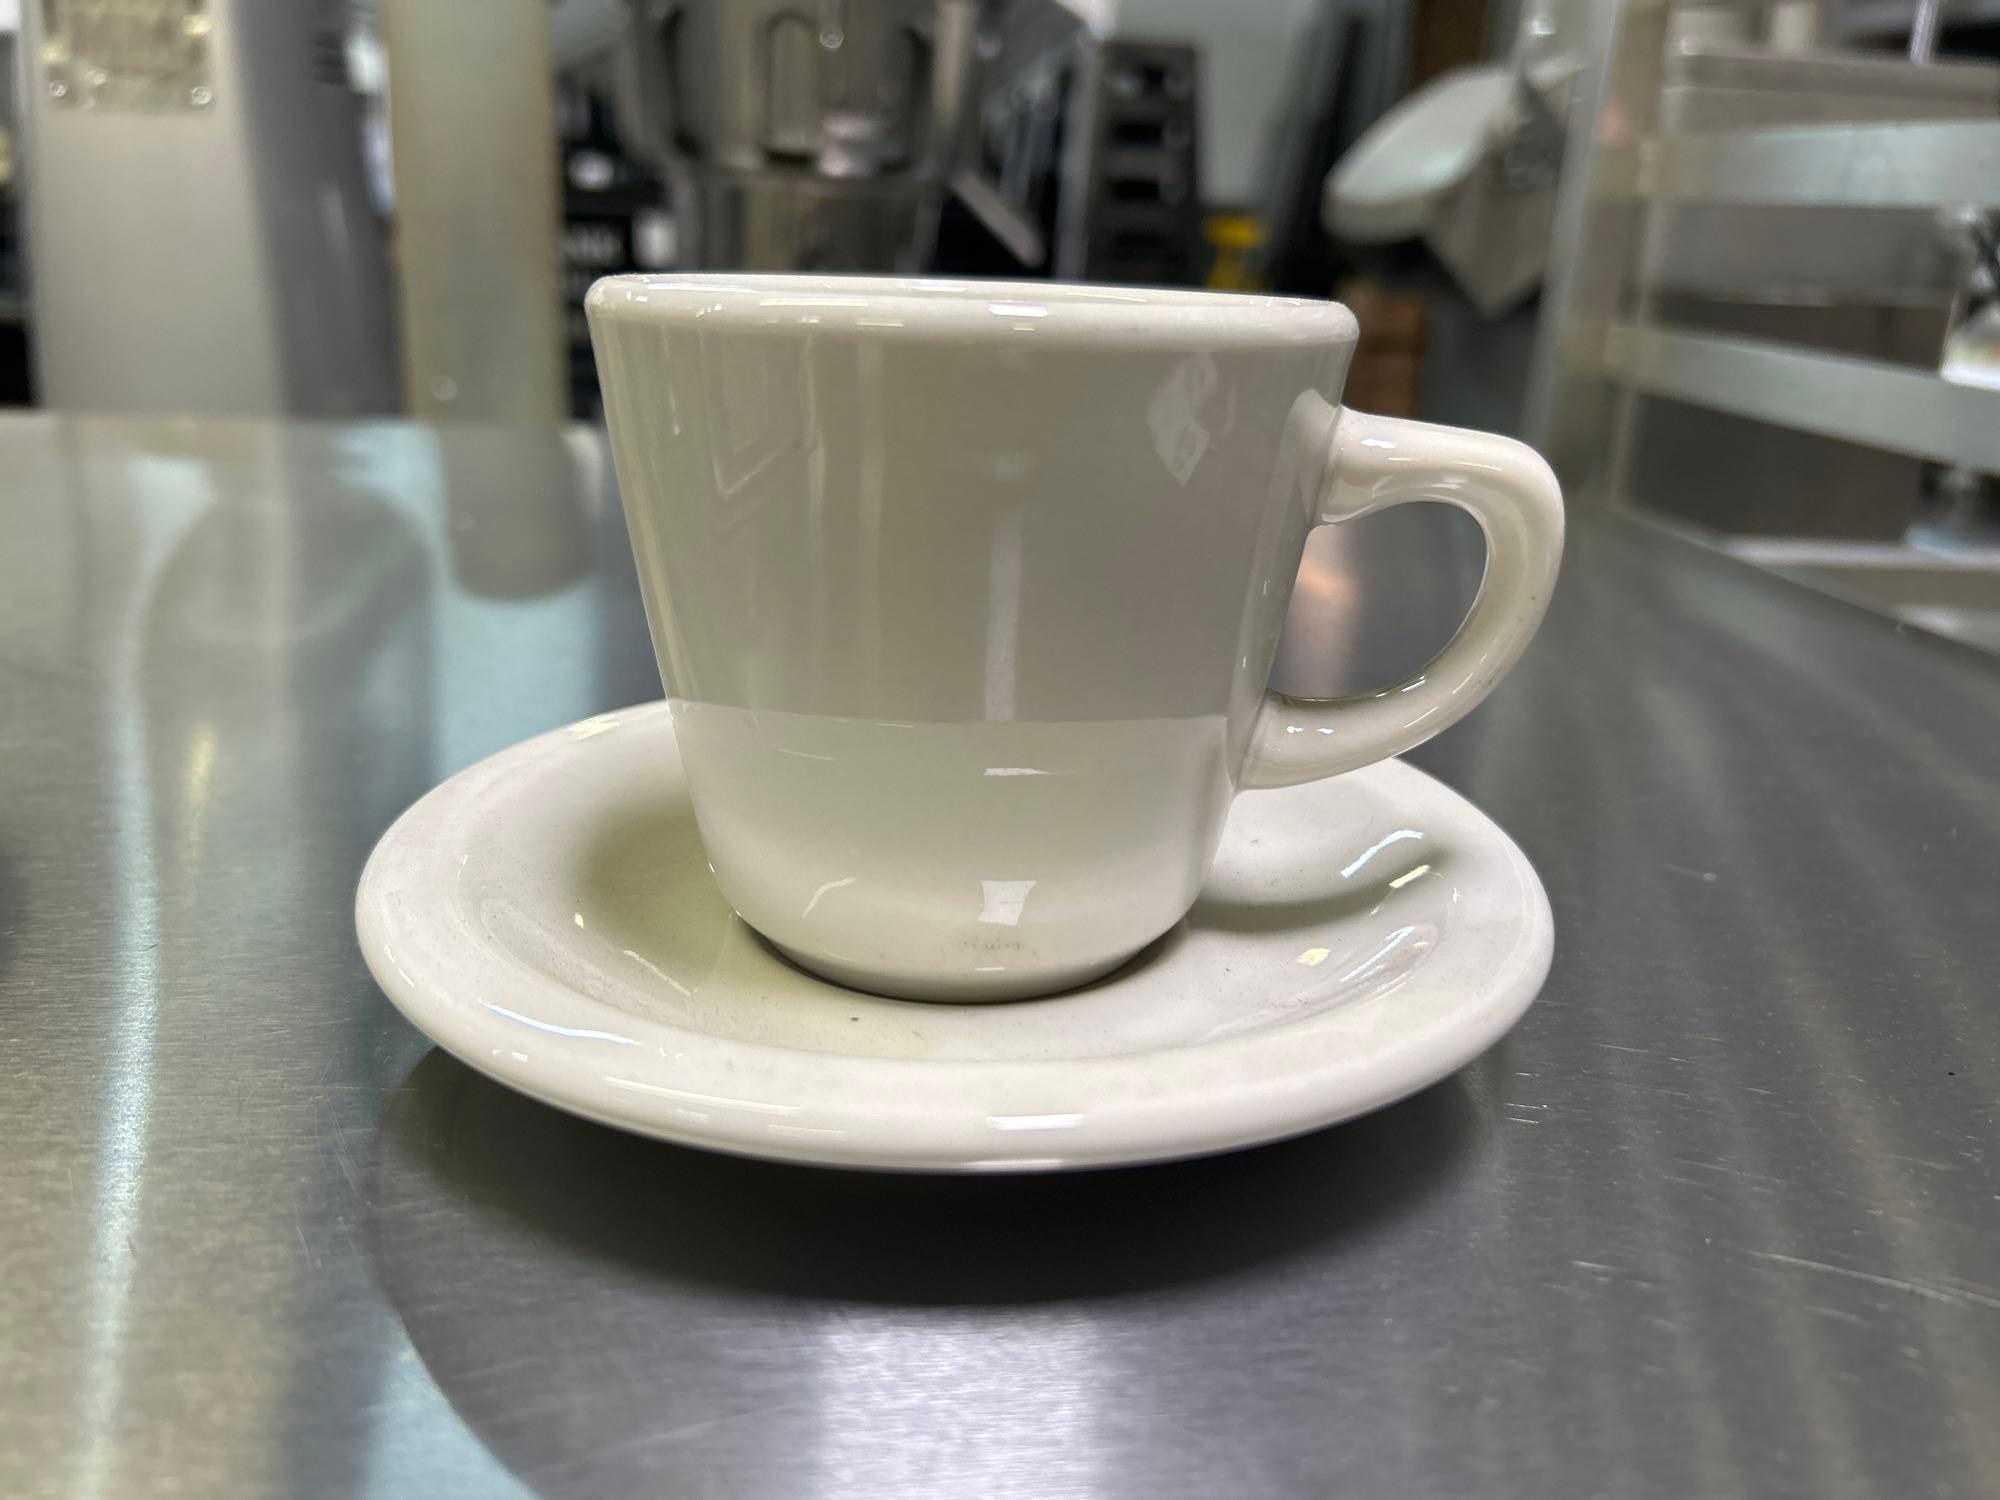 New - Sets of Ceramic Mugs and Saucers